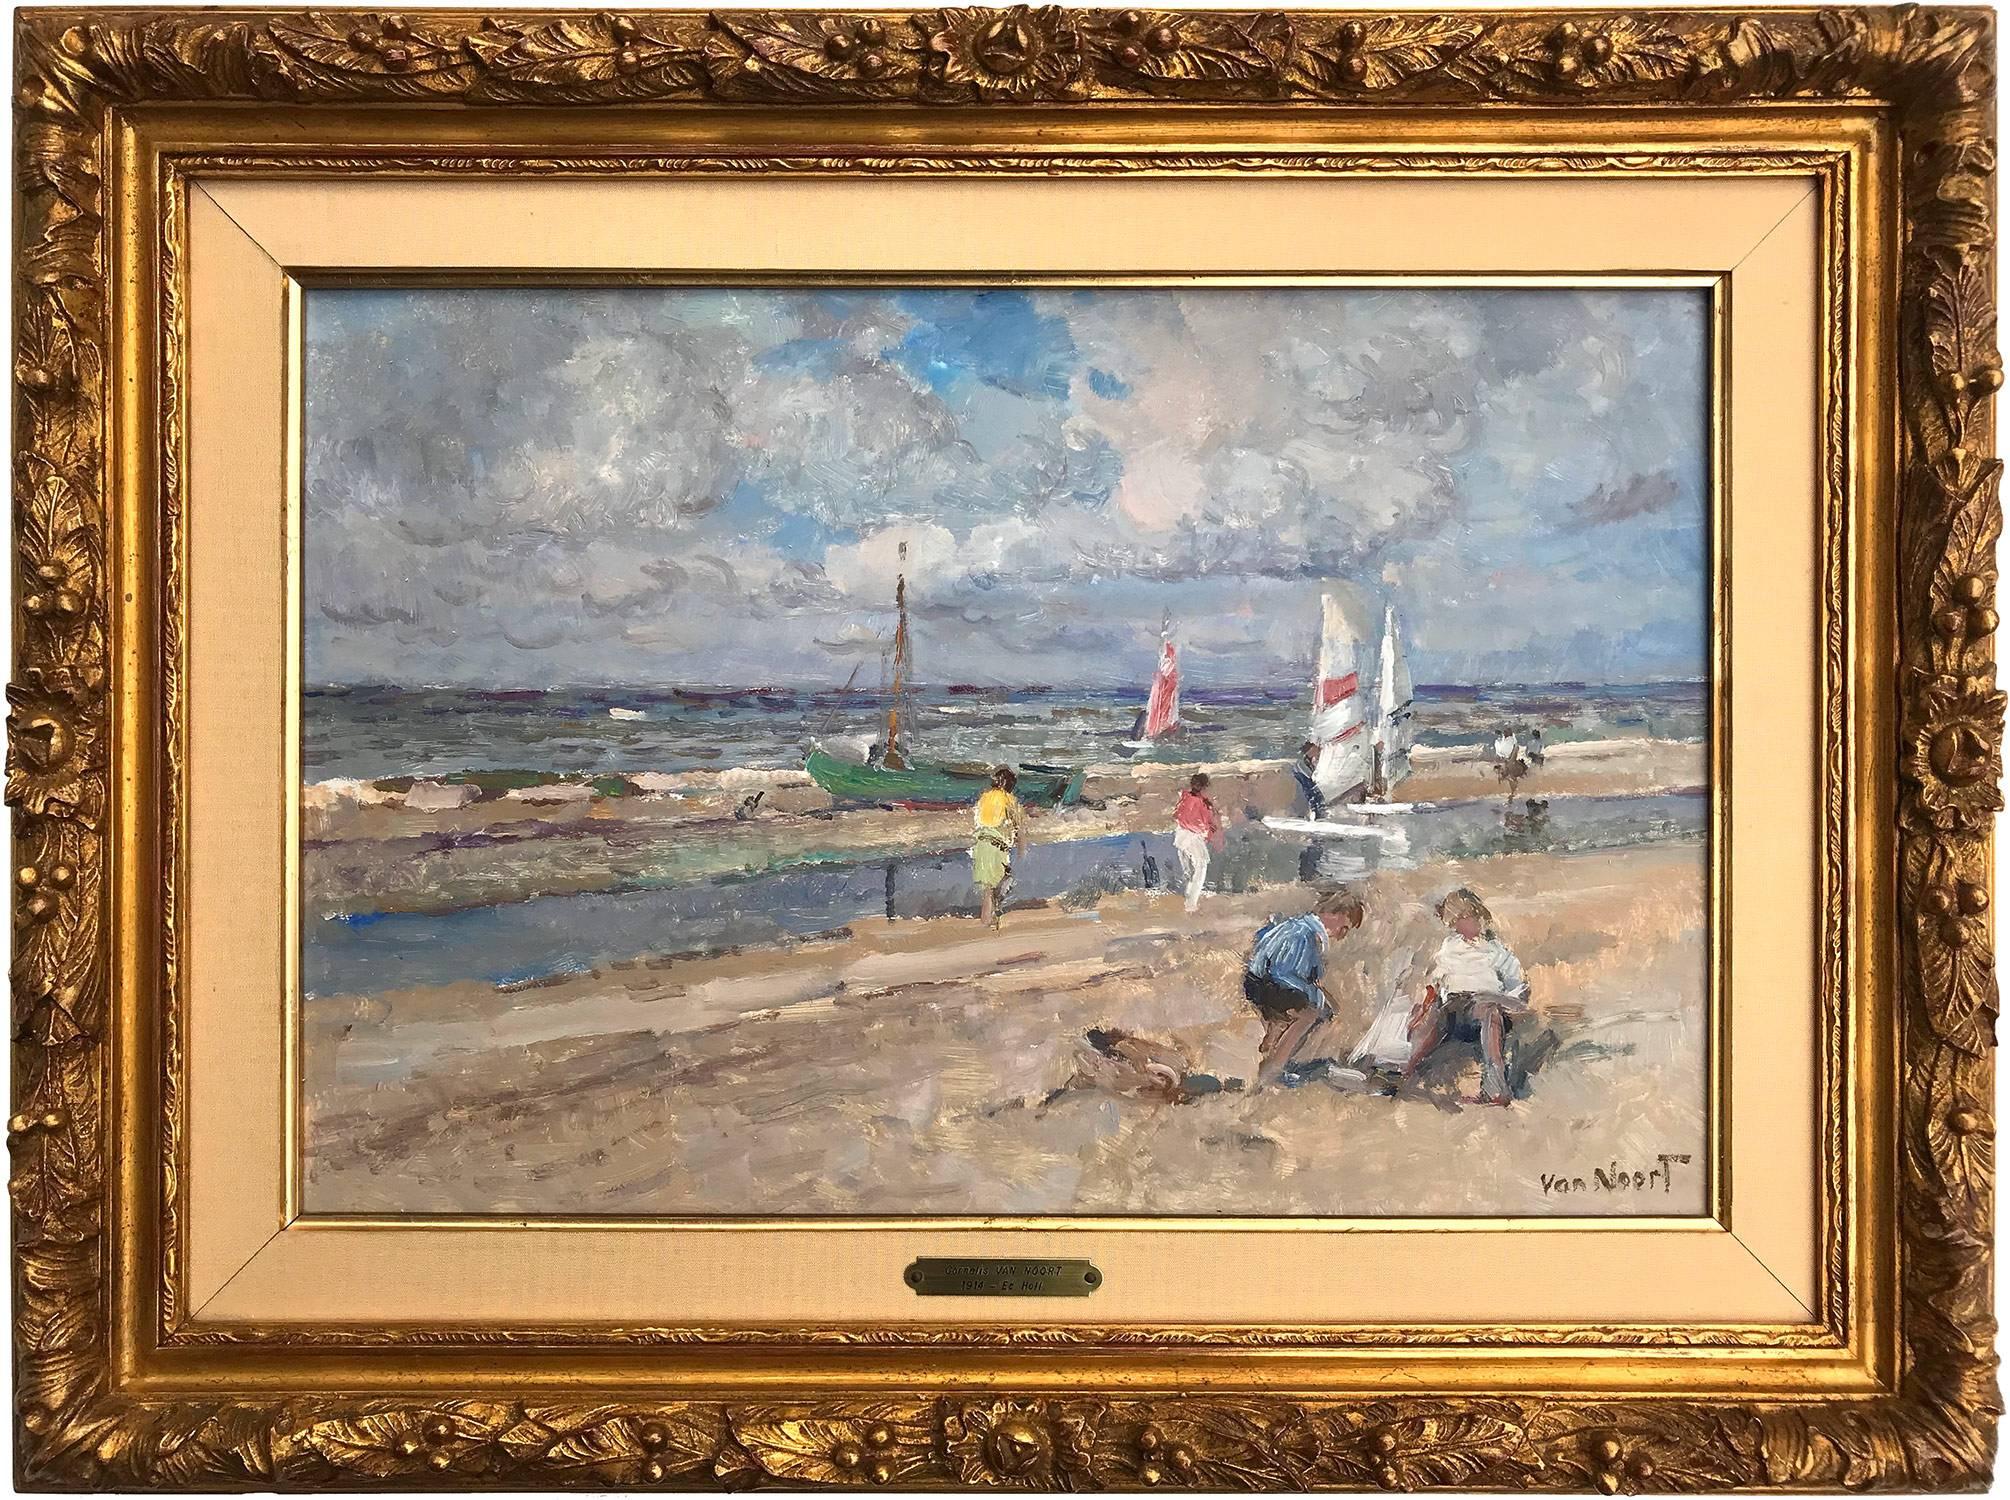 Arie C. Van Noort Figurative Painting - Beach Scene with Figures and Sailing Boats